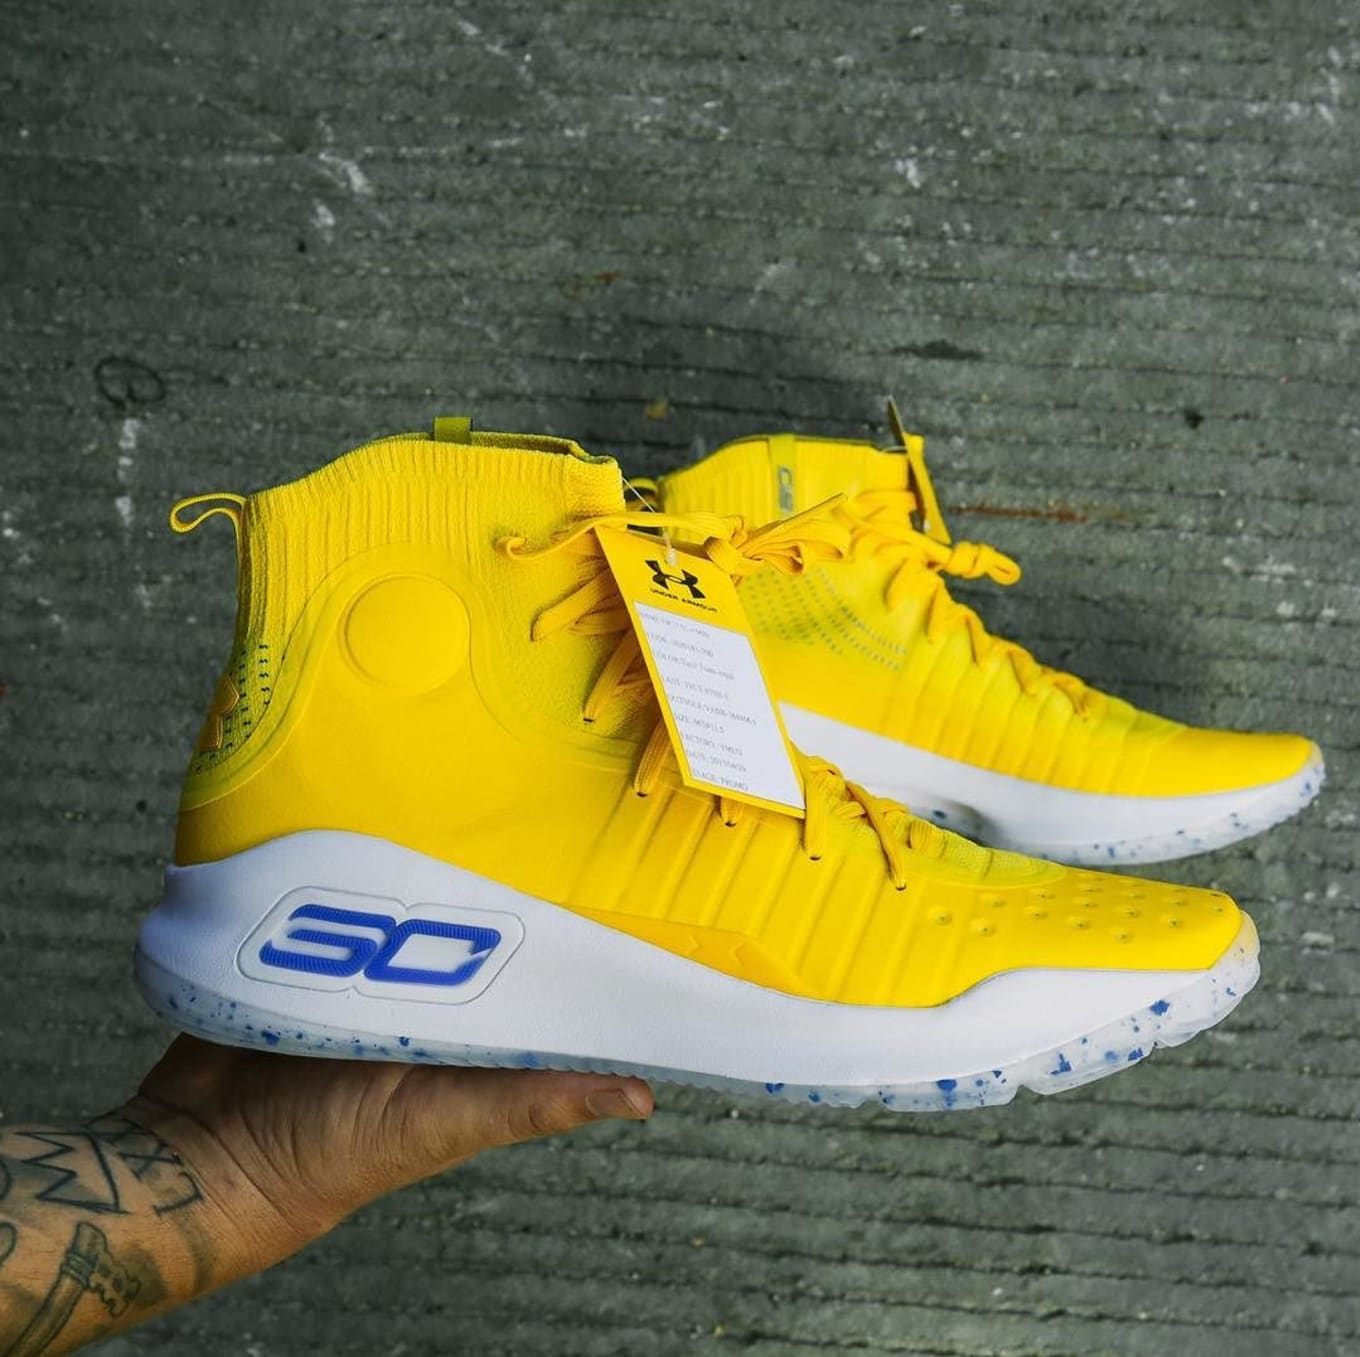 stephen curry yellow shoes